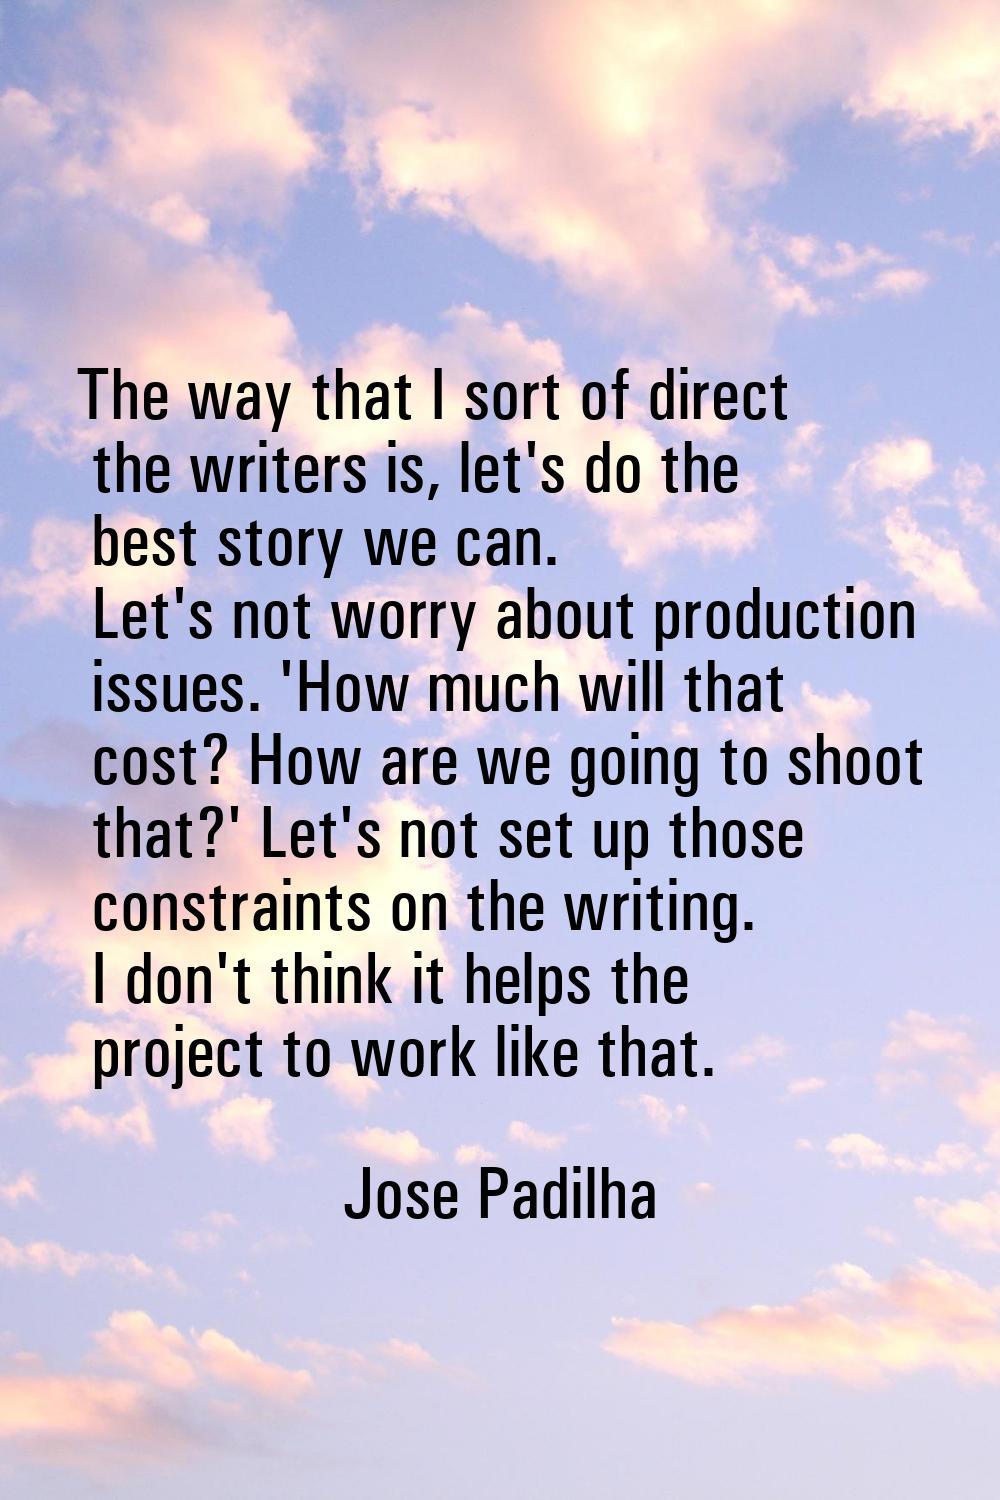 The way that I sort of direct the writers is, let's do the best story we can. Let's not worry about